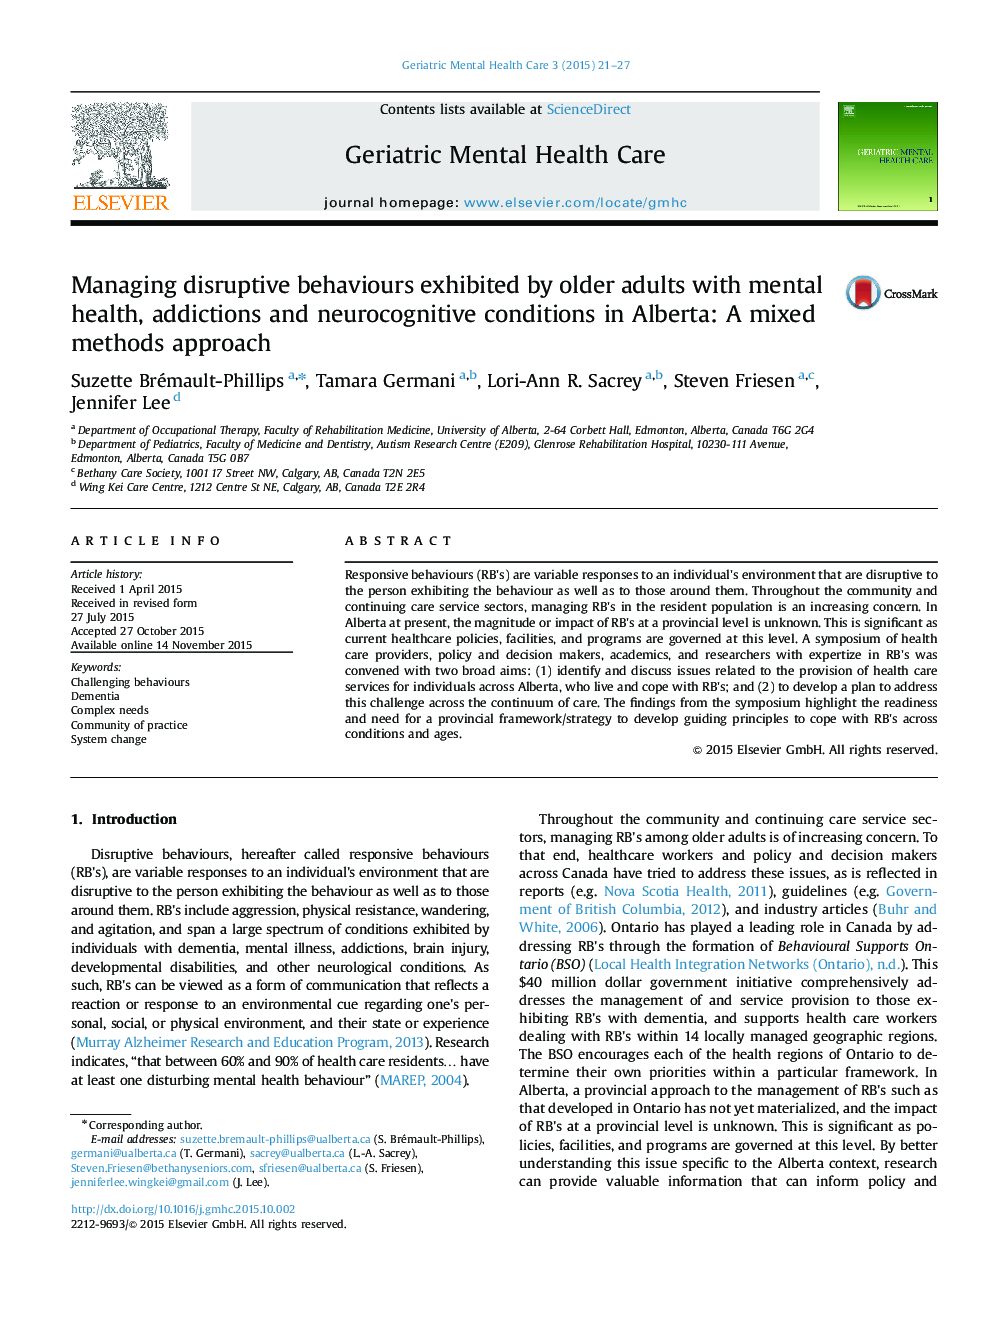 Managing disruptive behaviours exhibited by older adults with mental health, addictions and neurocognitive conditions in Alberta: A mixed methods approach